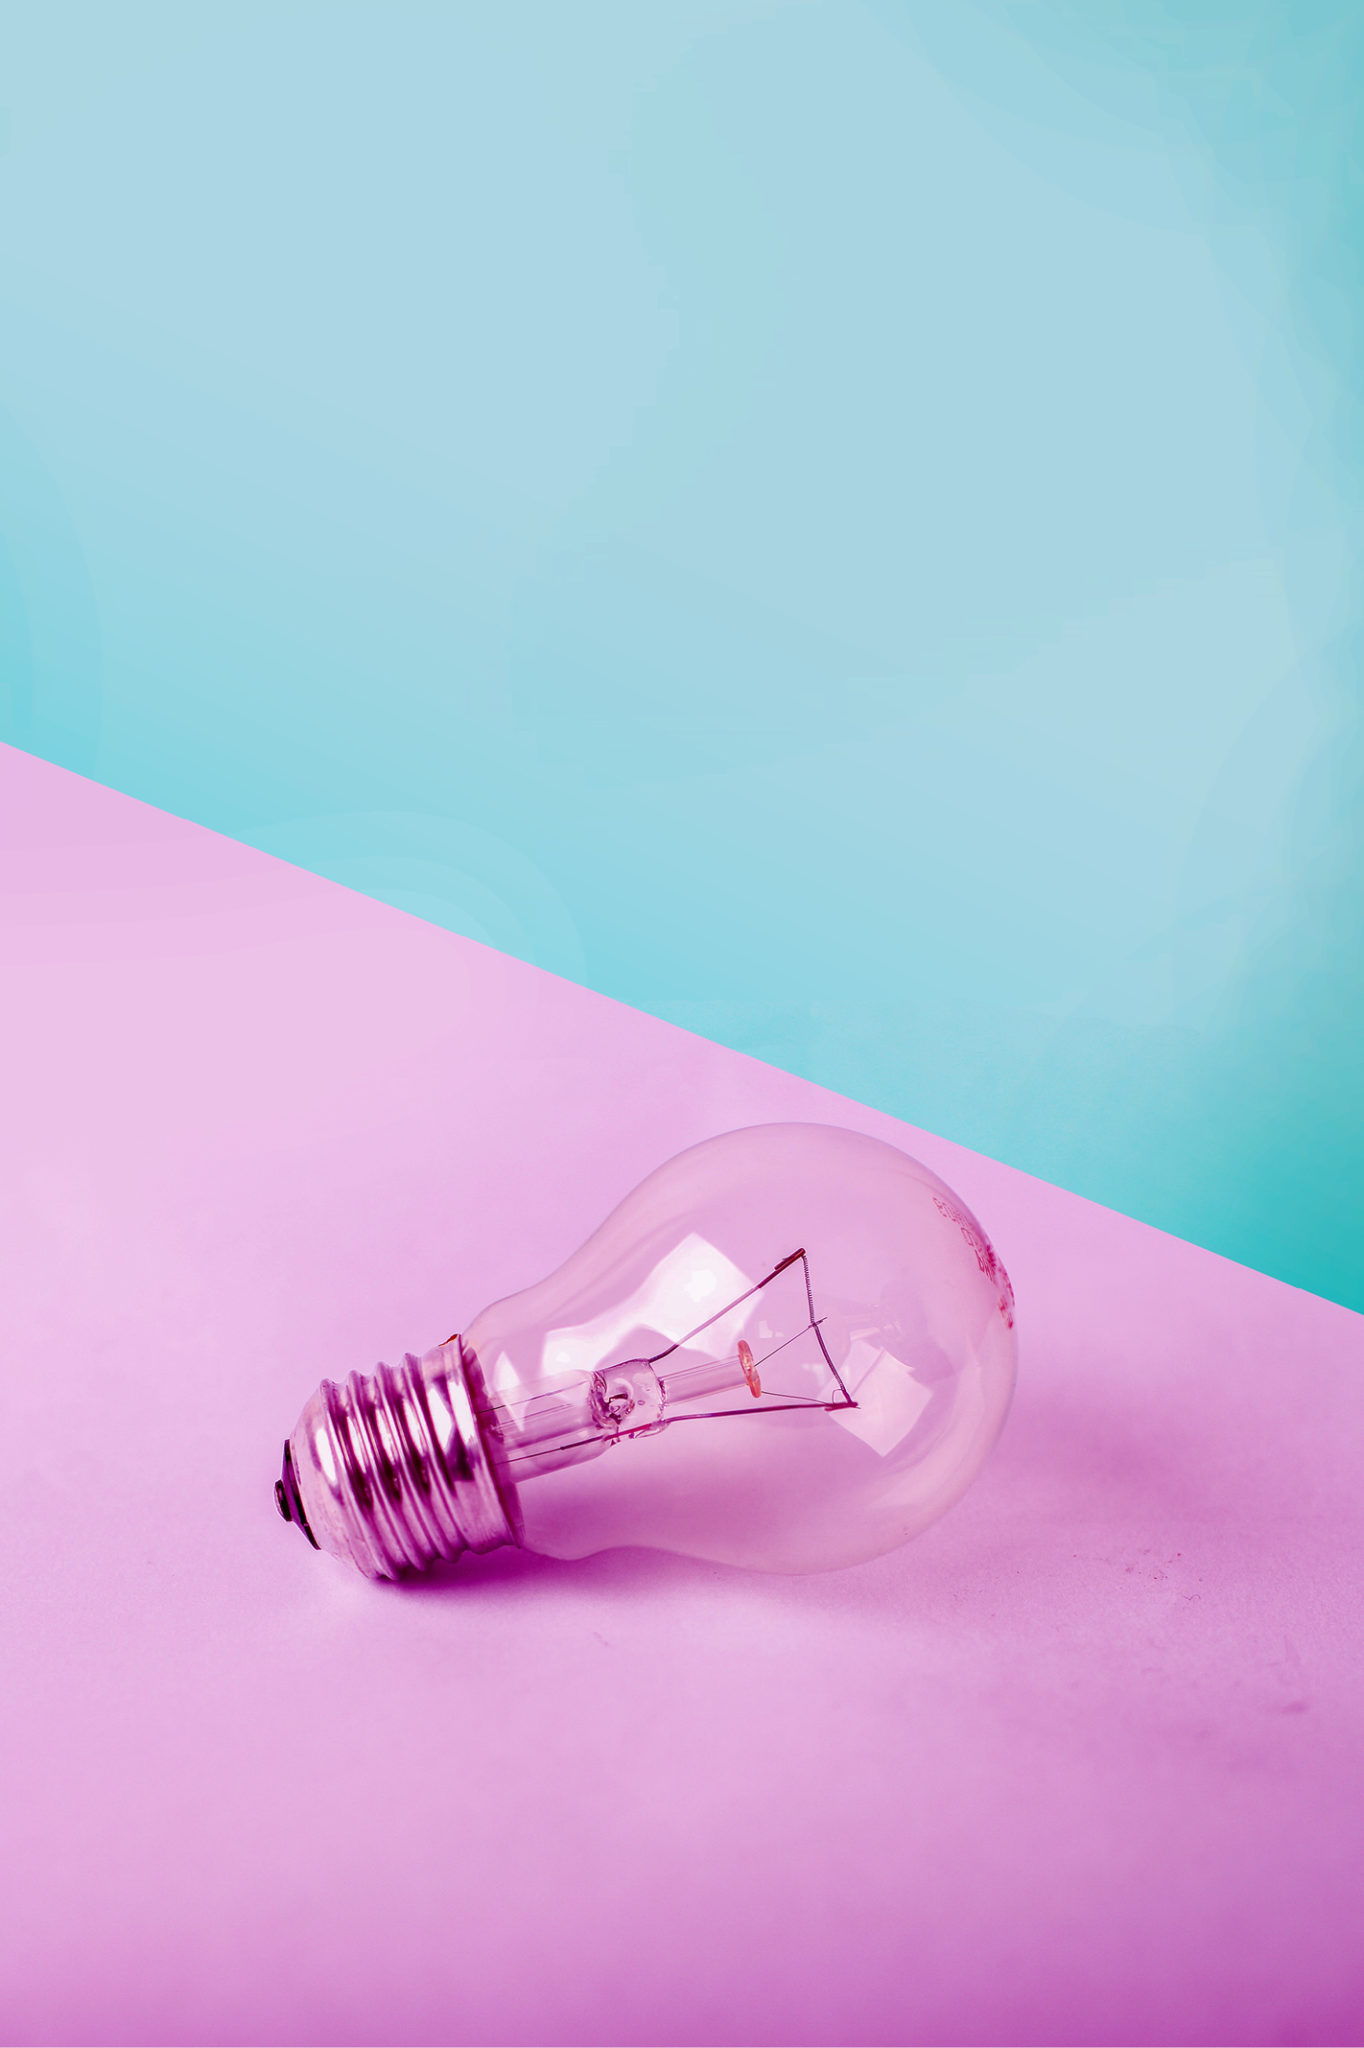 lightbulb on pink and blue wall